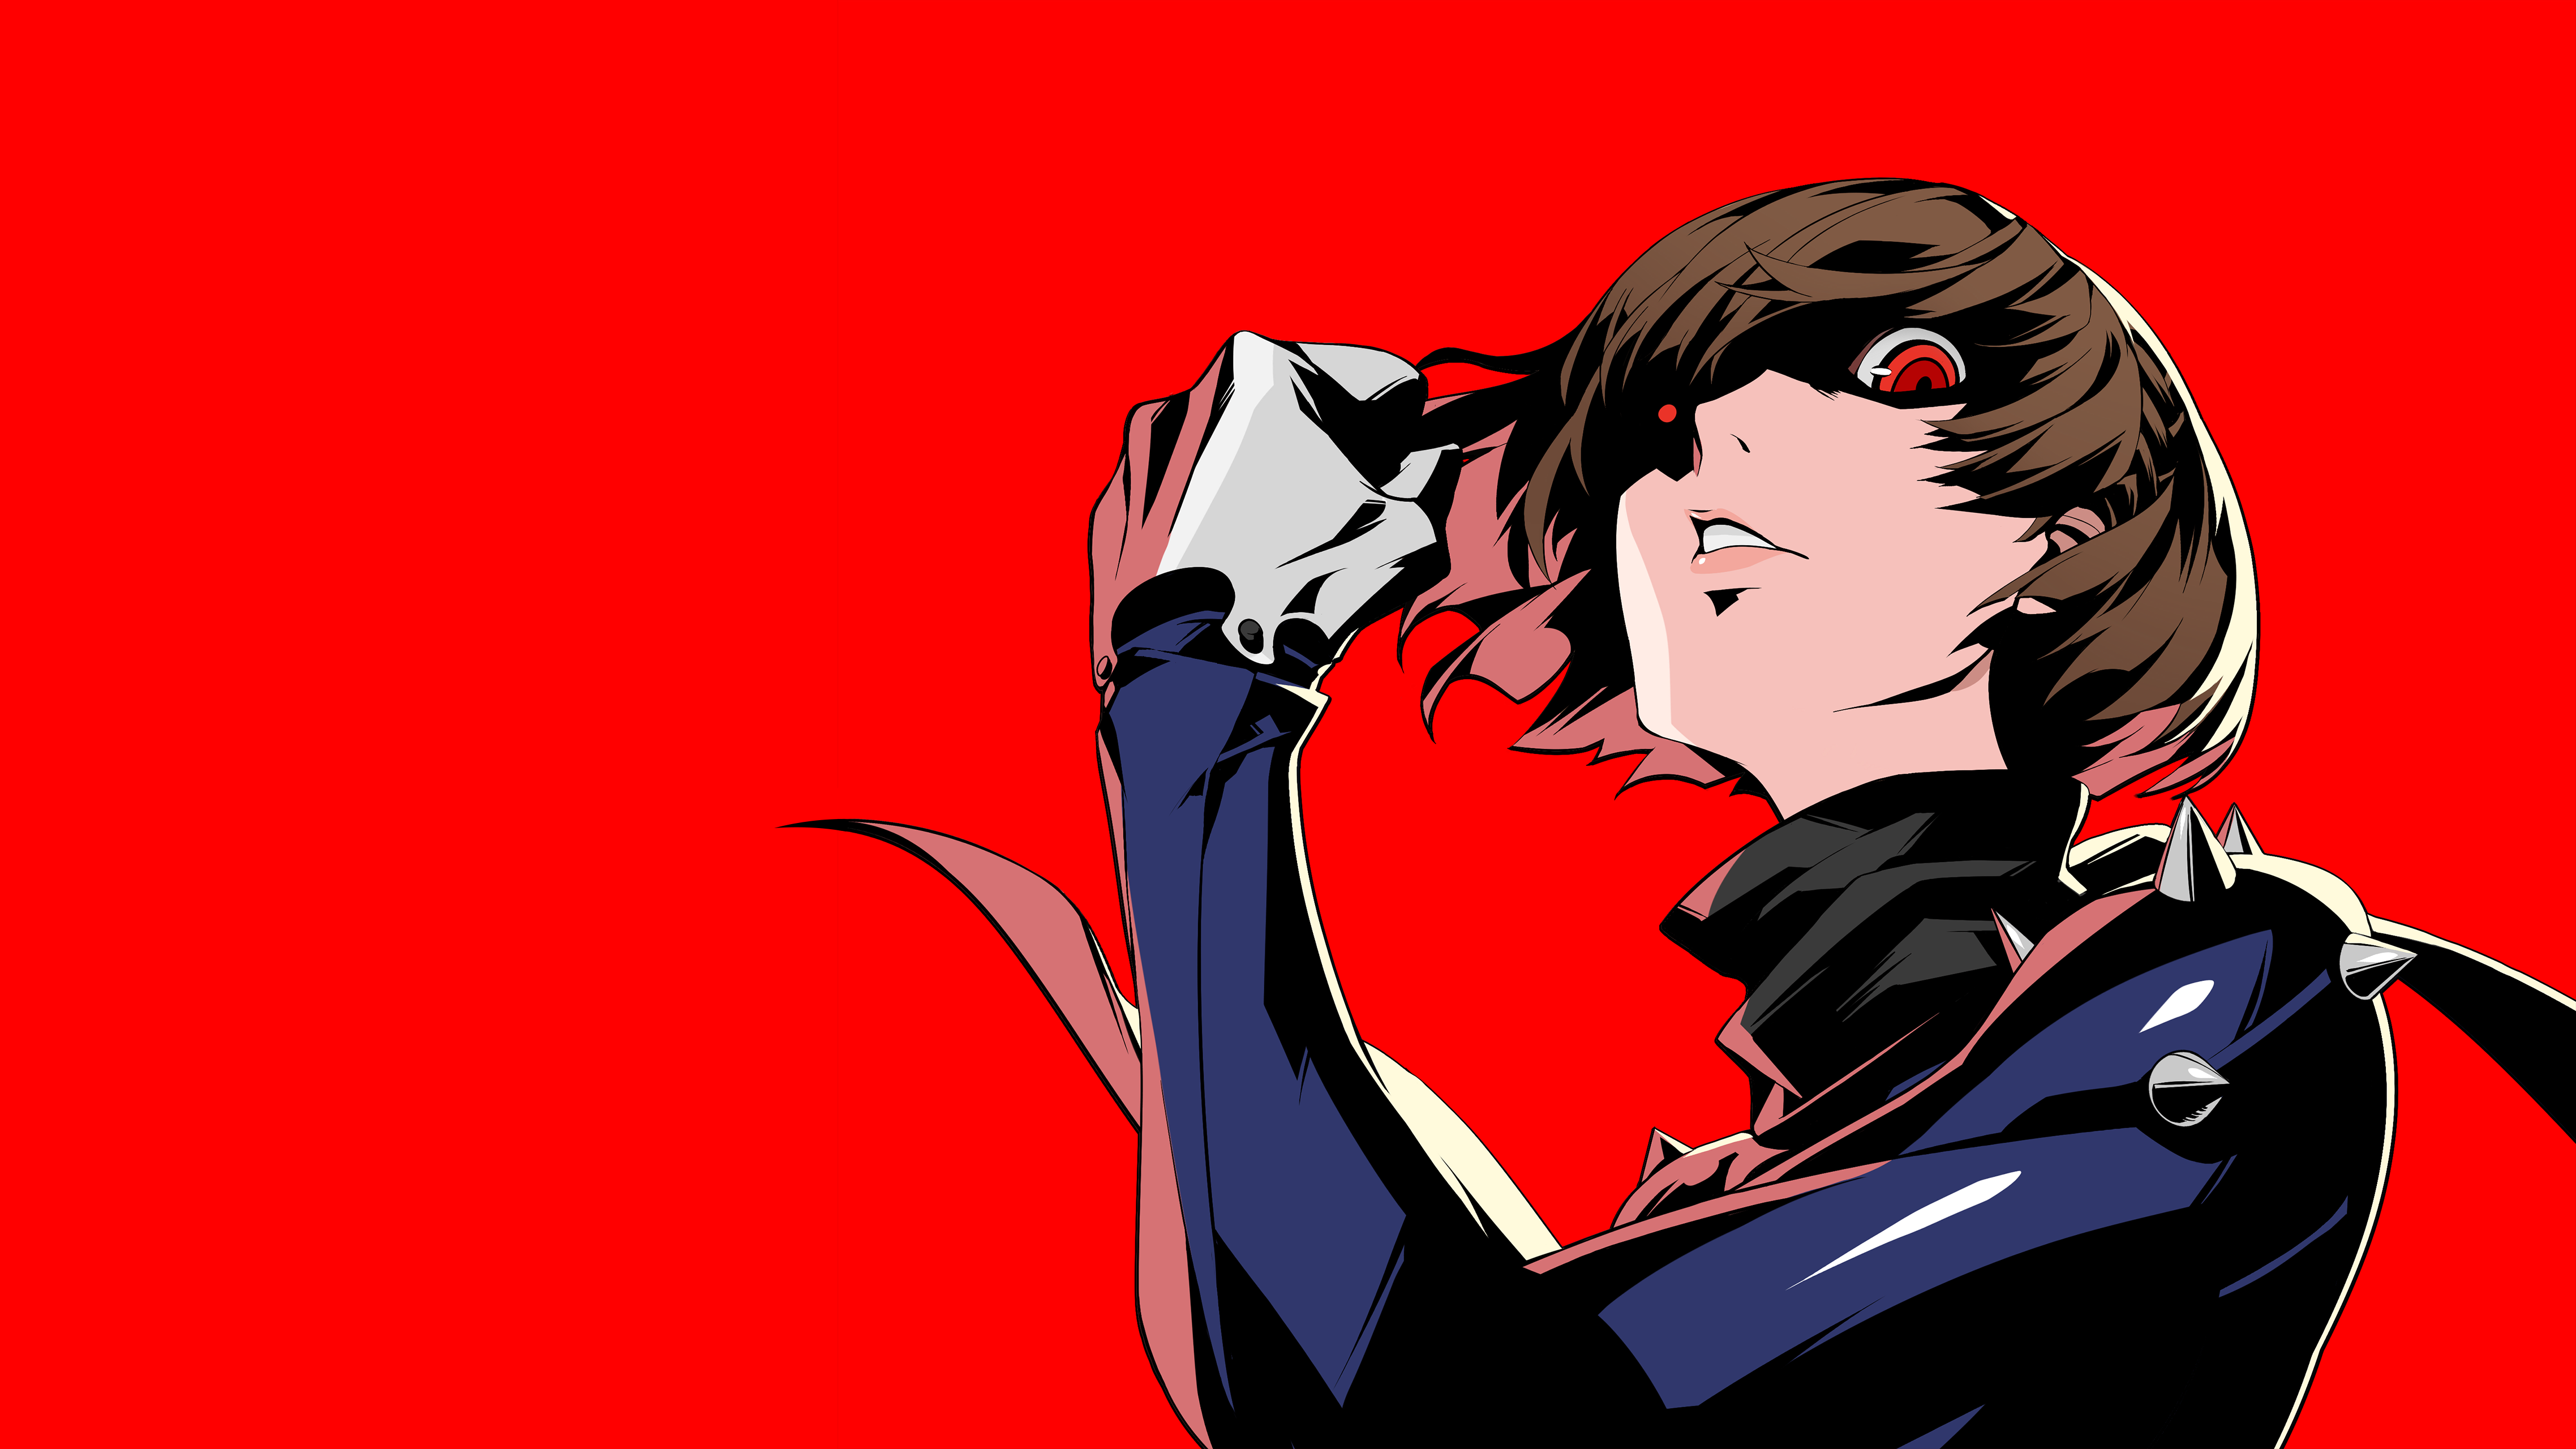 Video Game Persona 5 Royal HD Wallpaper | Background Image